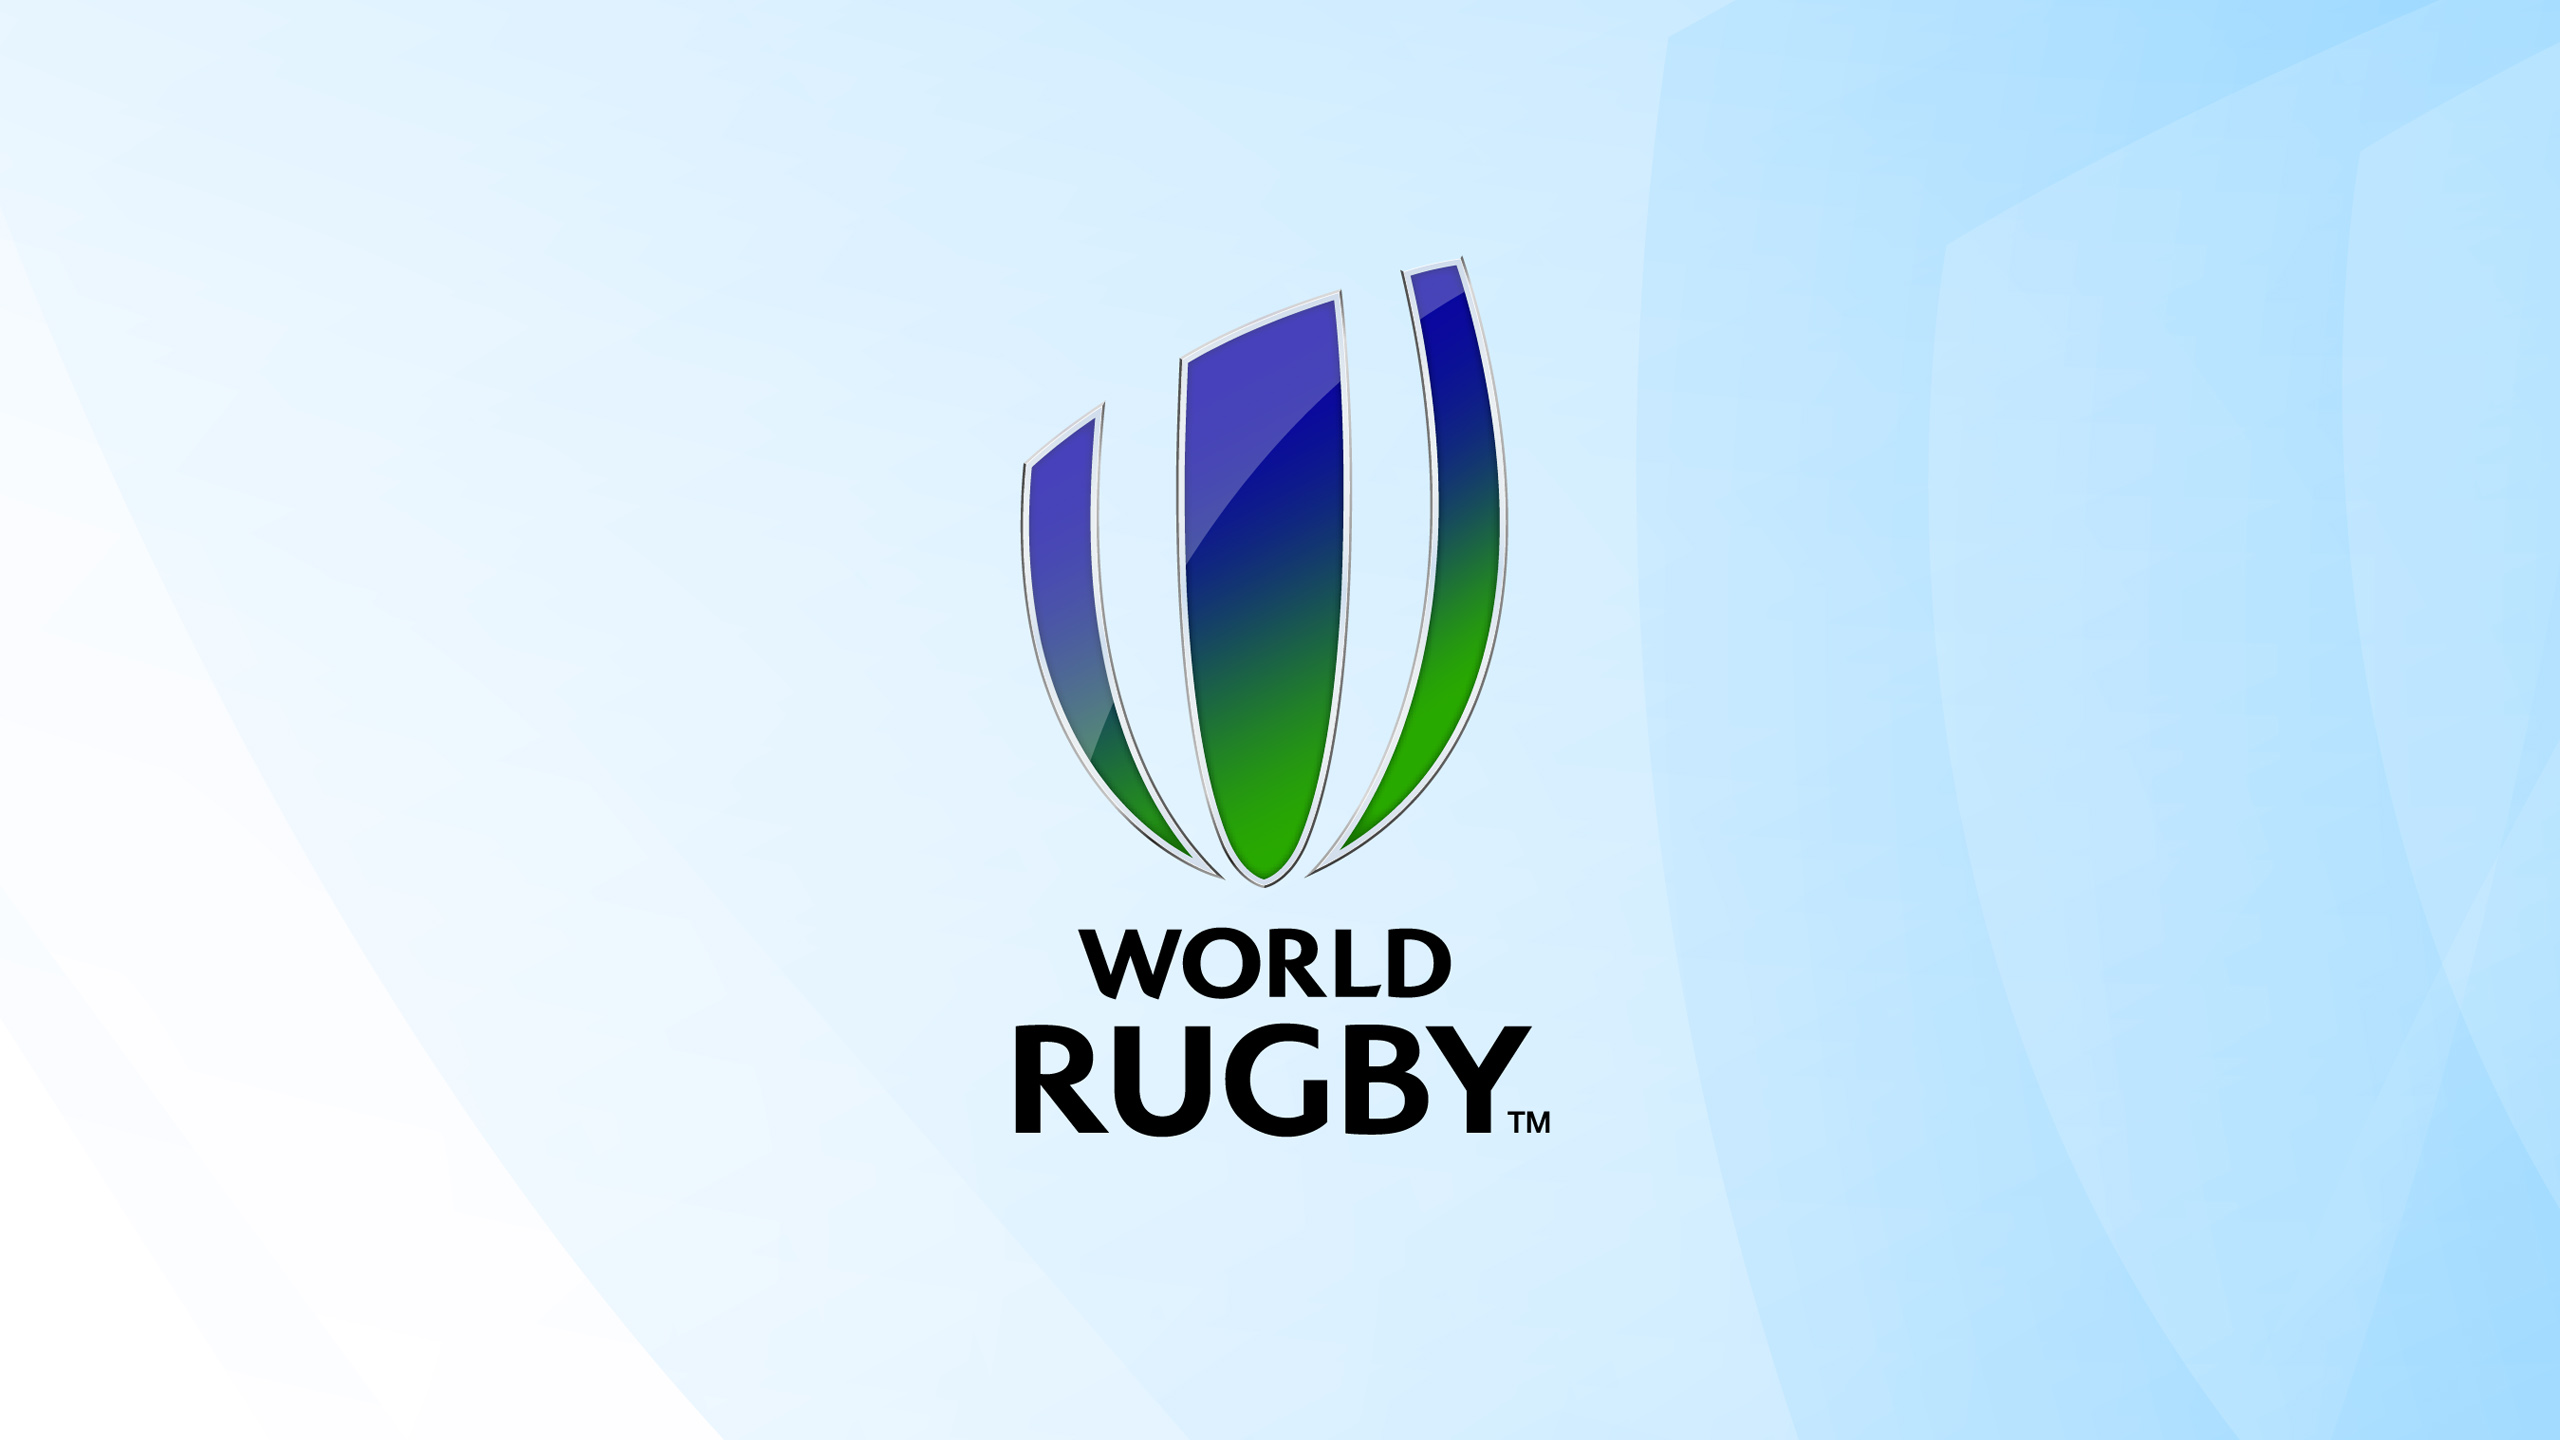 International Rugby Board and Rugby Football